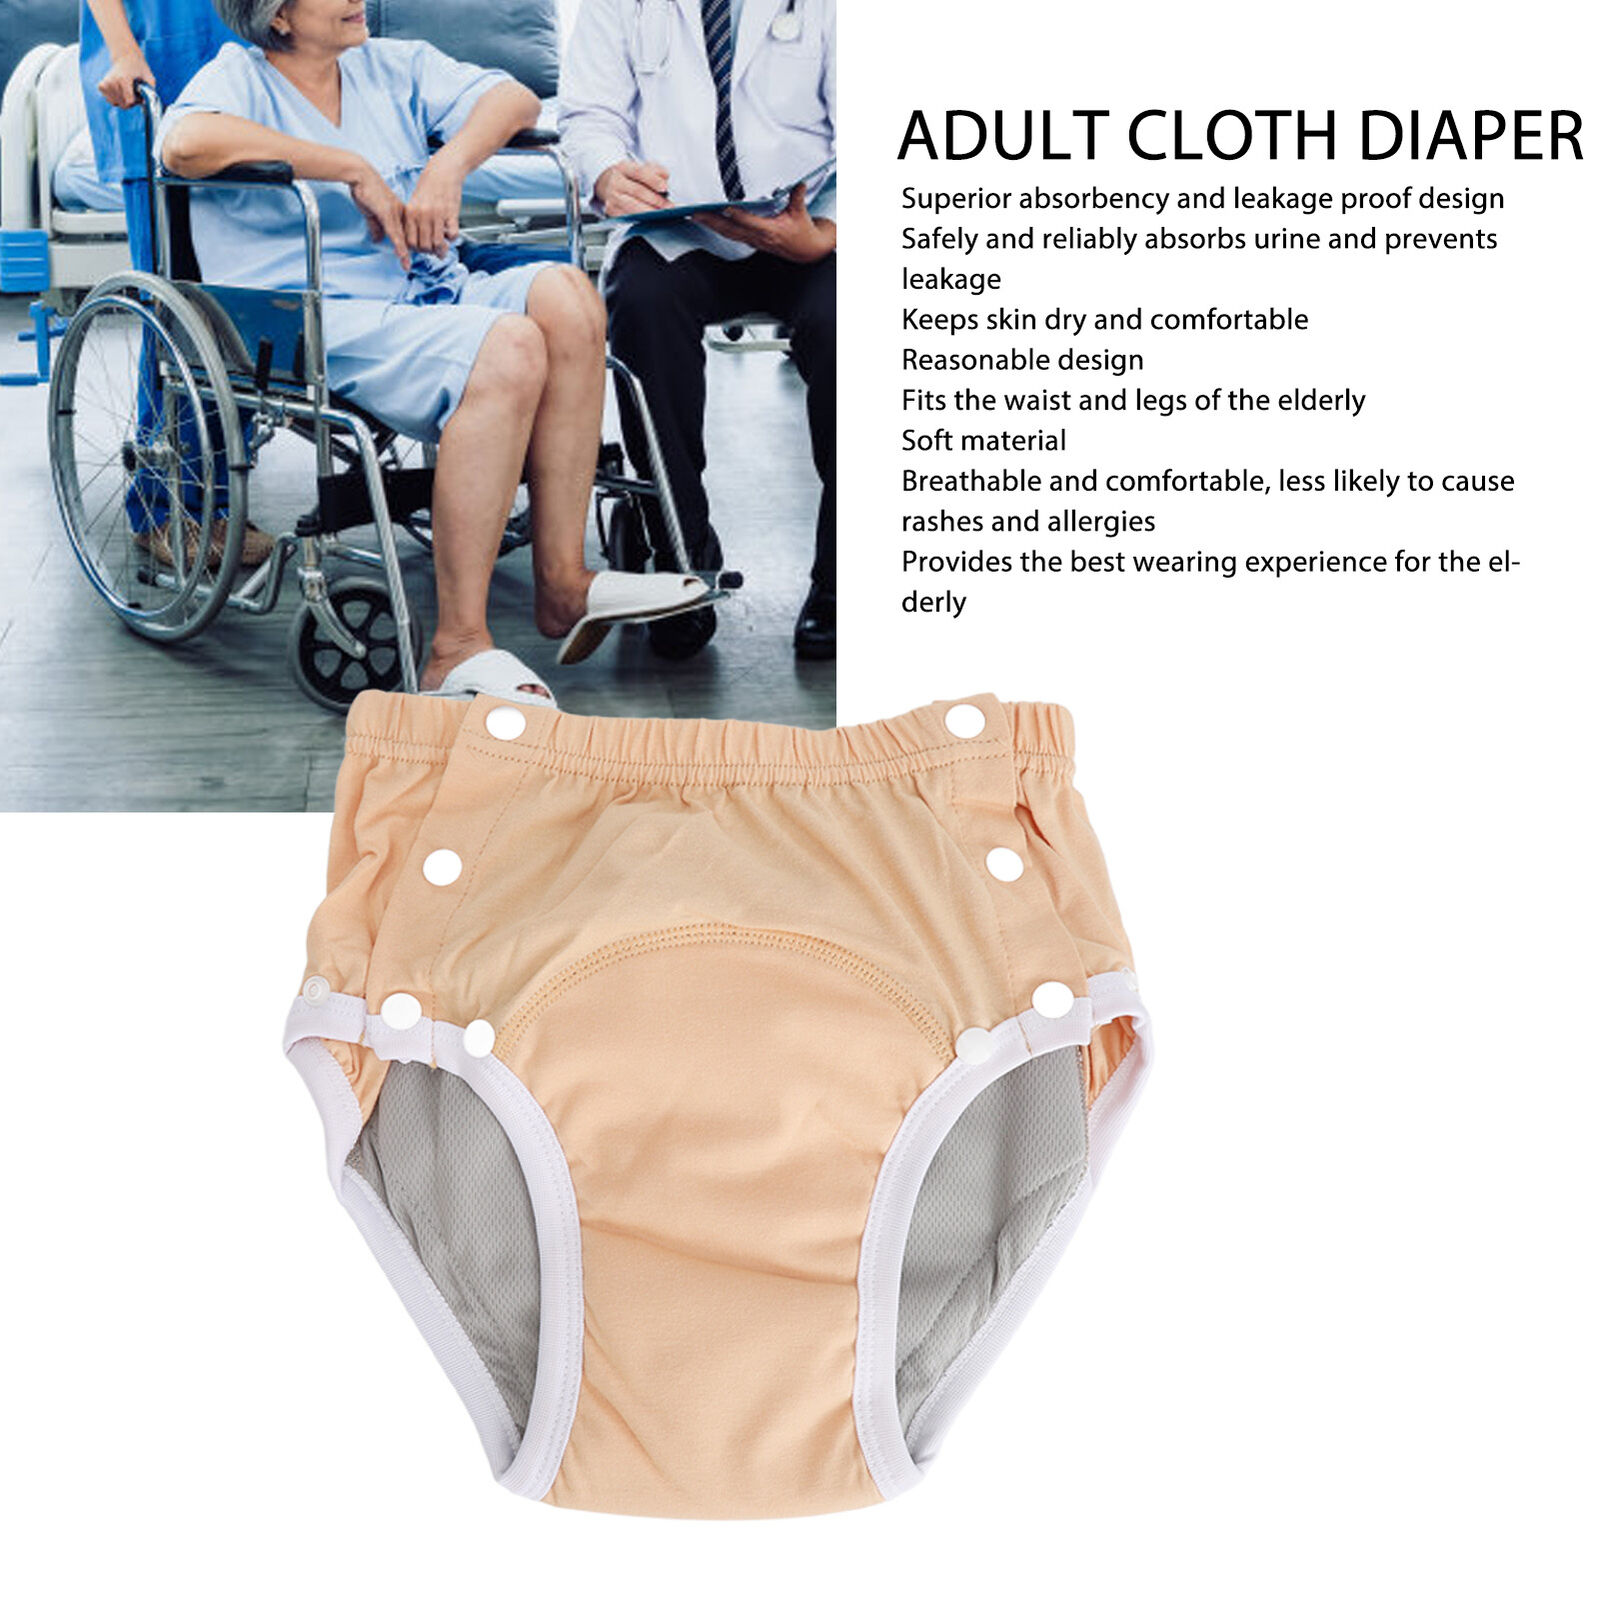 aleks andreev recommends Adults Wearing Cloth Diapers